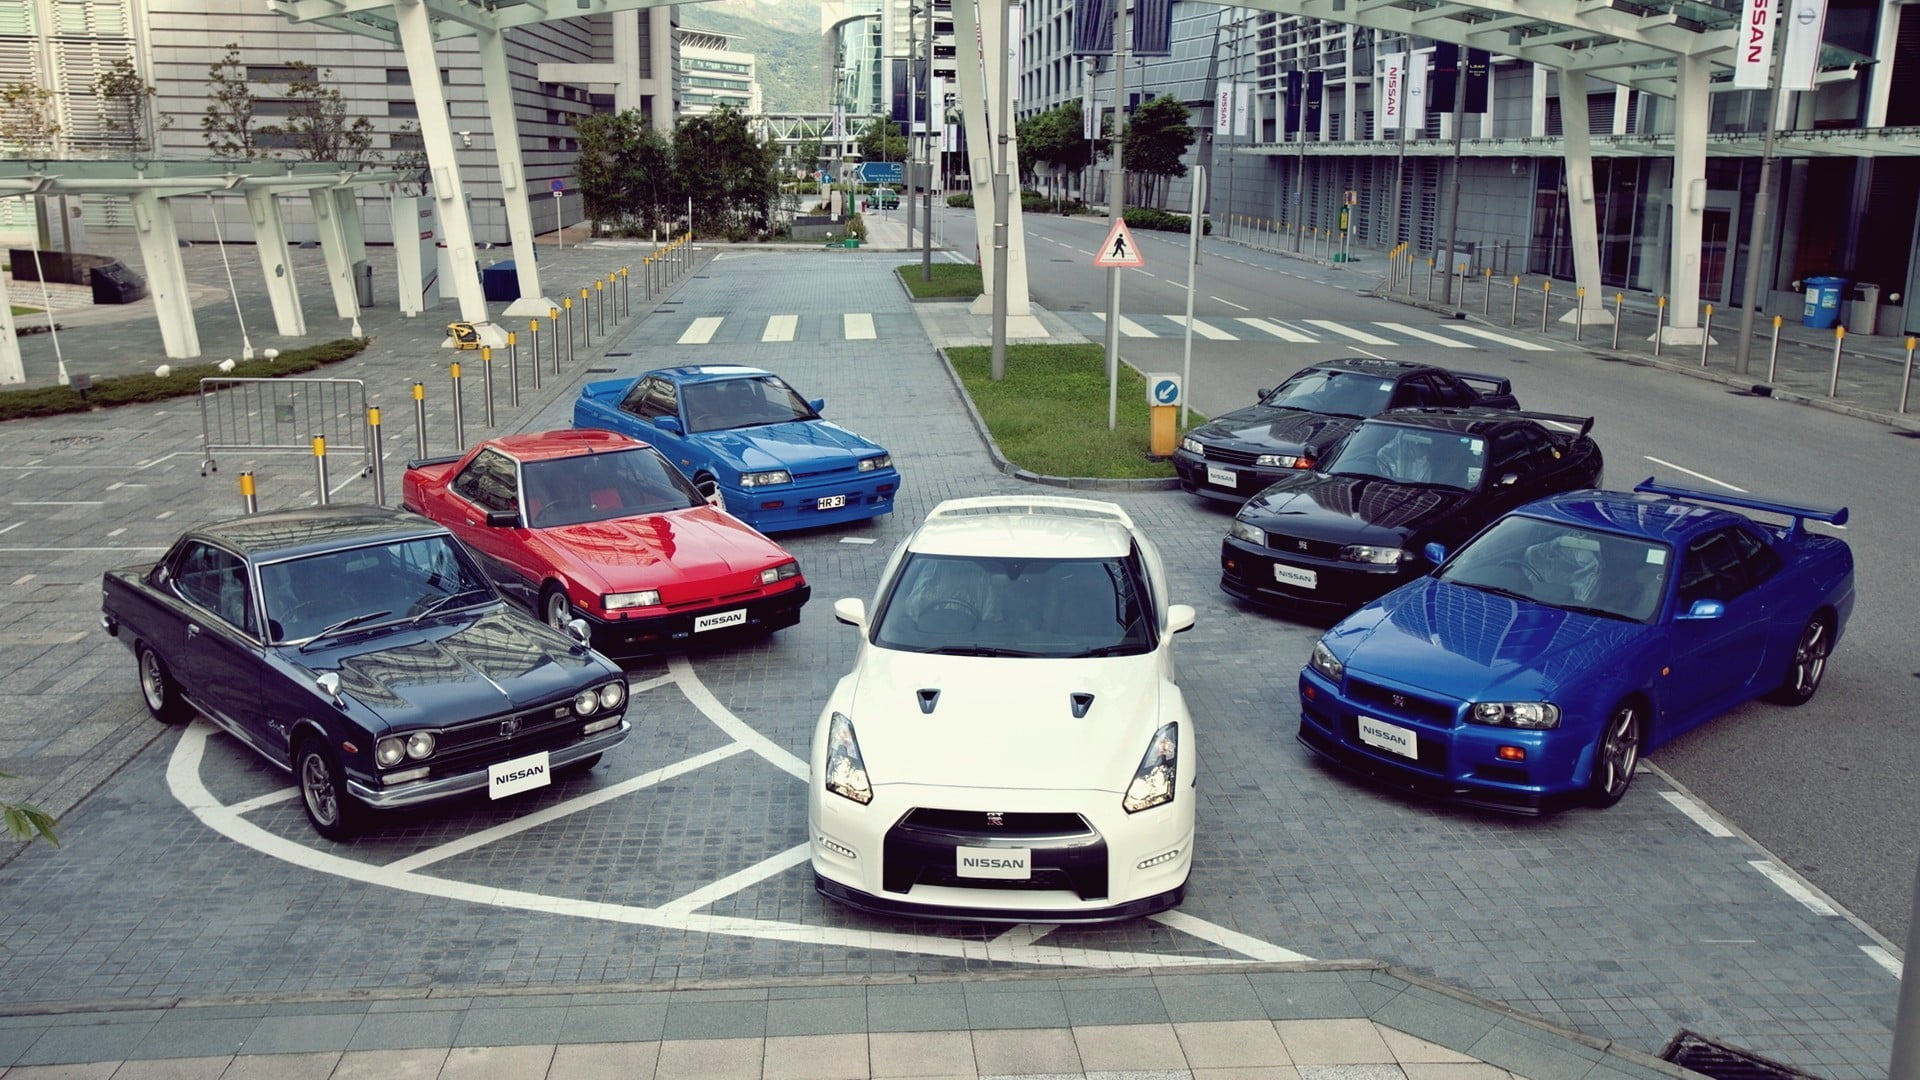 white Nissan GT-R coupe, Nissan Skyline, Nissan GT-R R32, Nissan Skyline GT-R R33